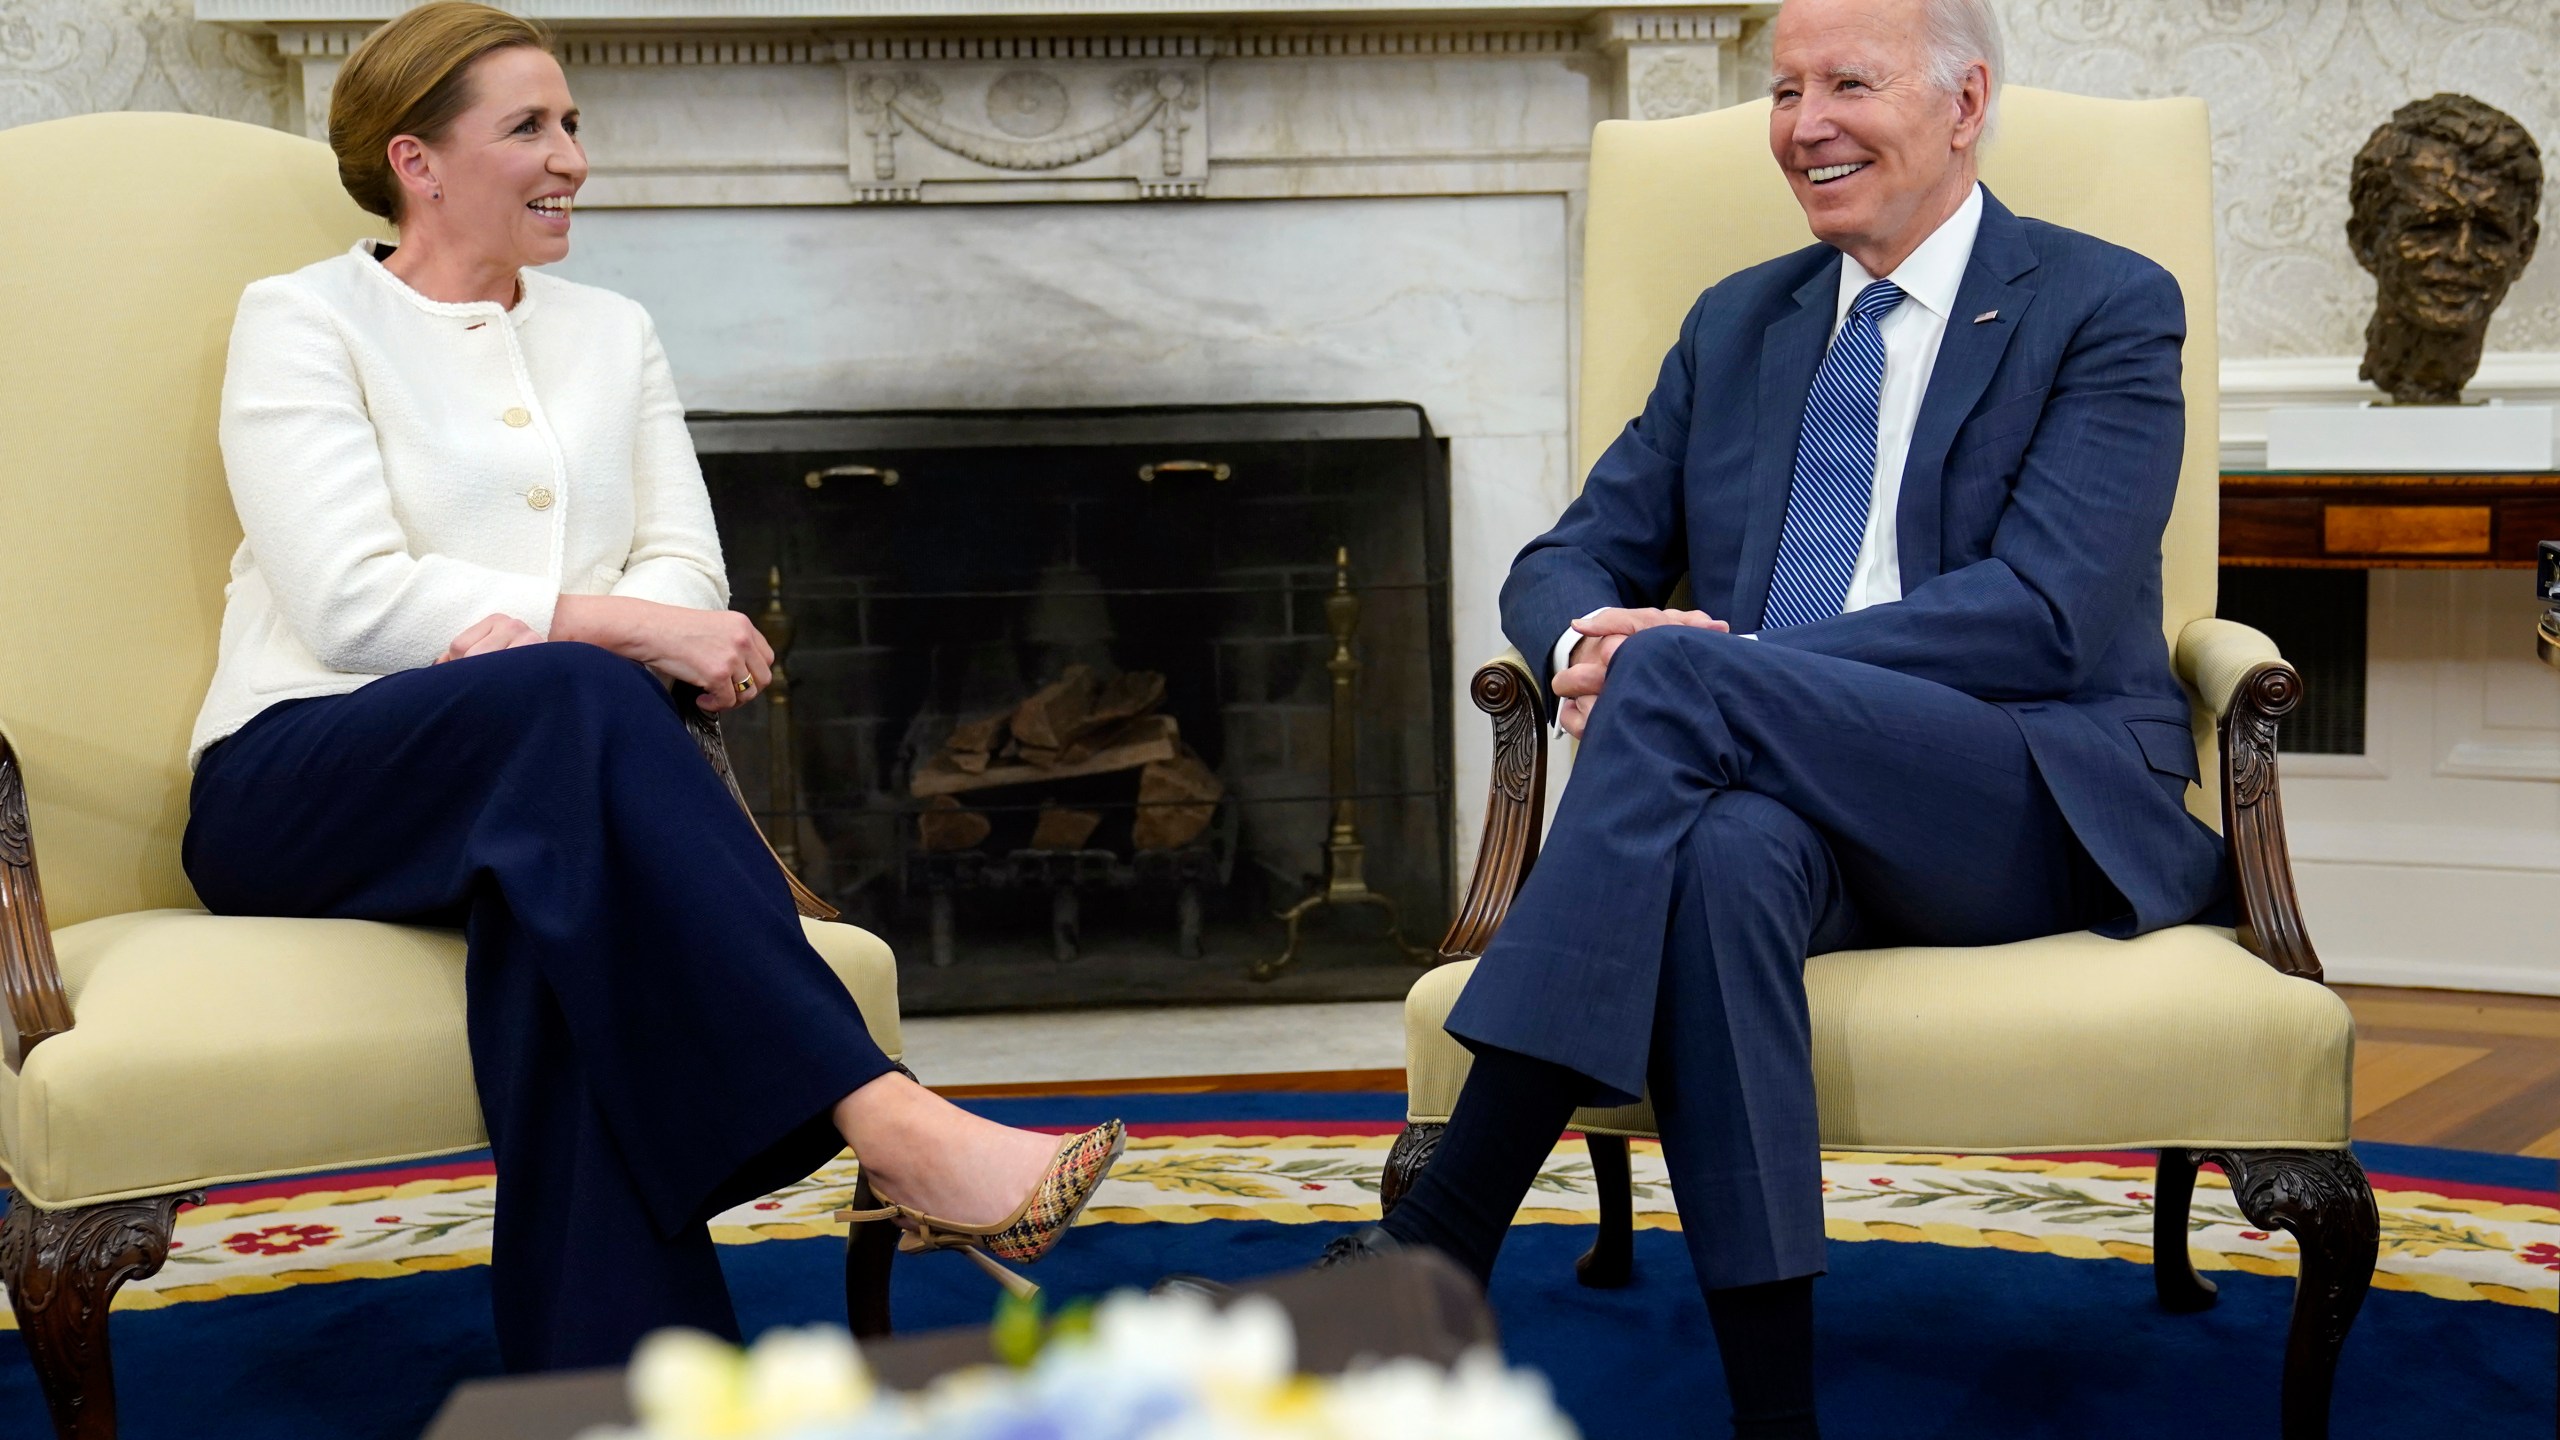 President Joe Biden meets with Denmark's Prime Minister Mette Frederiksen in the Oval Office of the White House in Washington, Monday, June 5, 2023. (AP Photo/Susan Walsh)